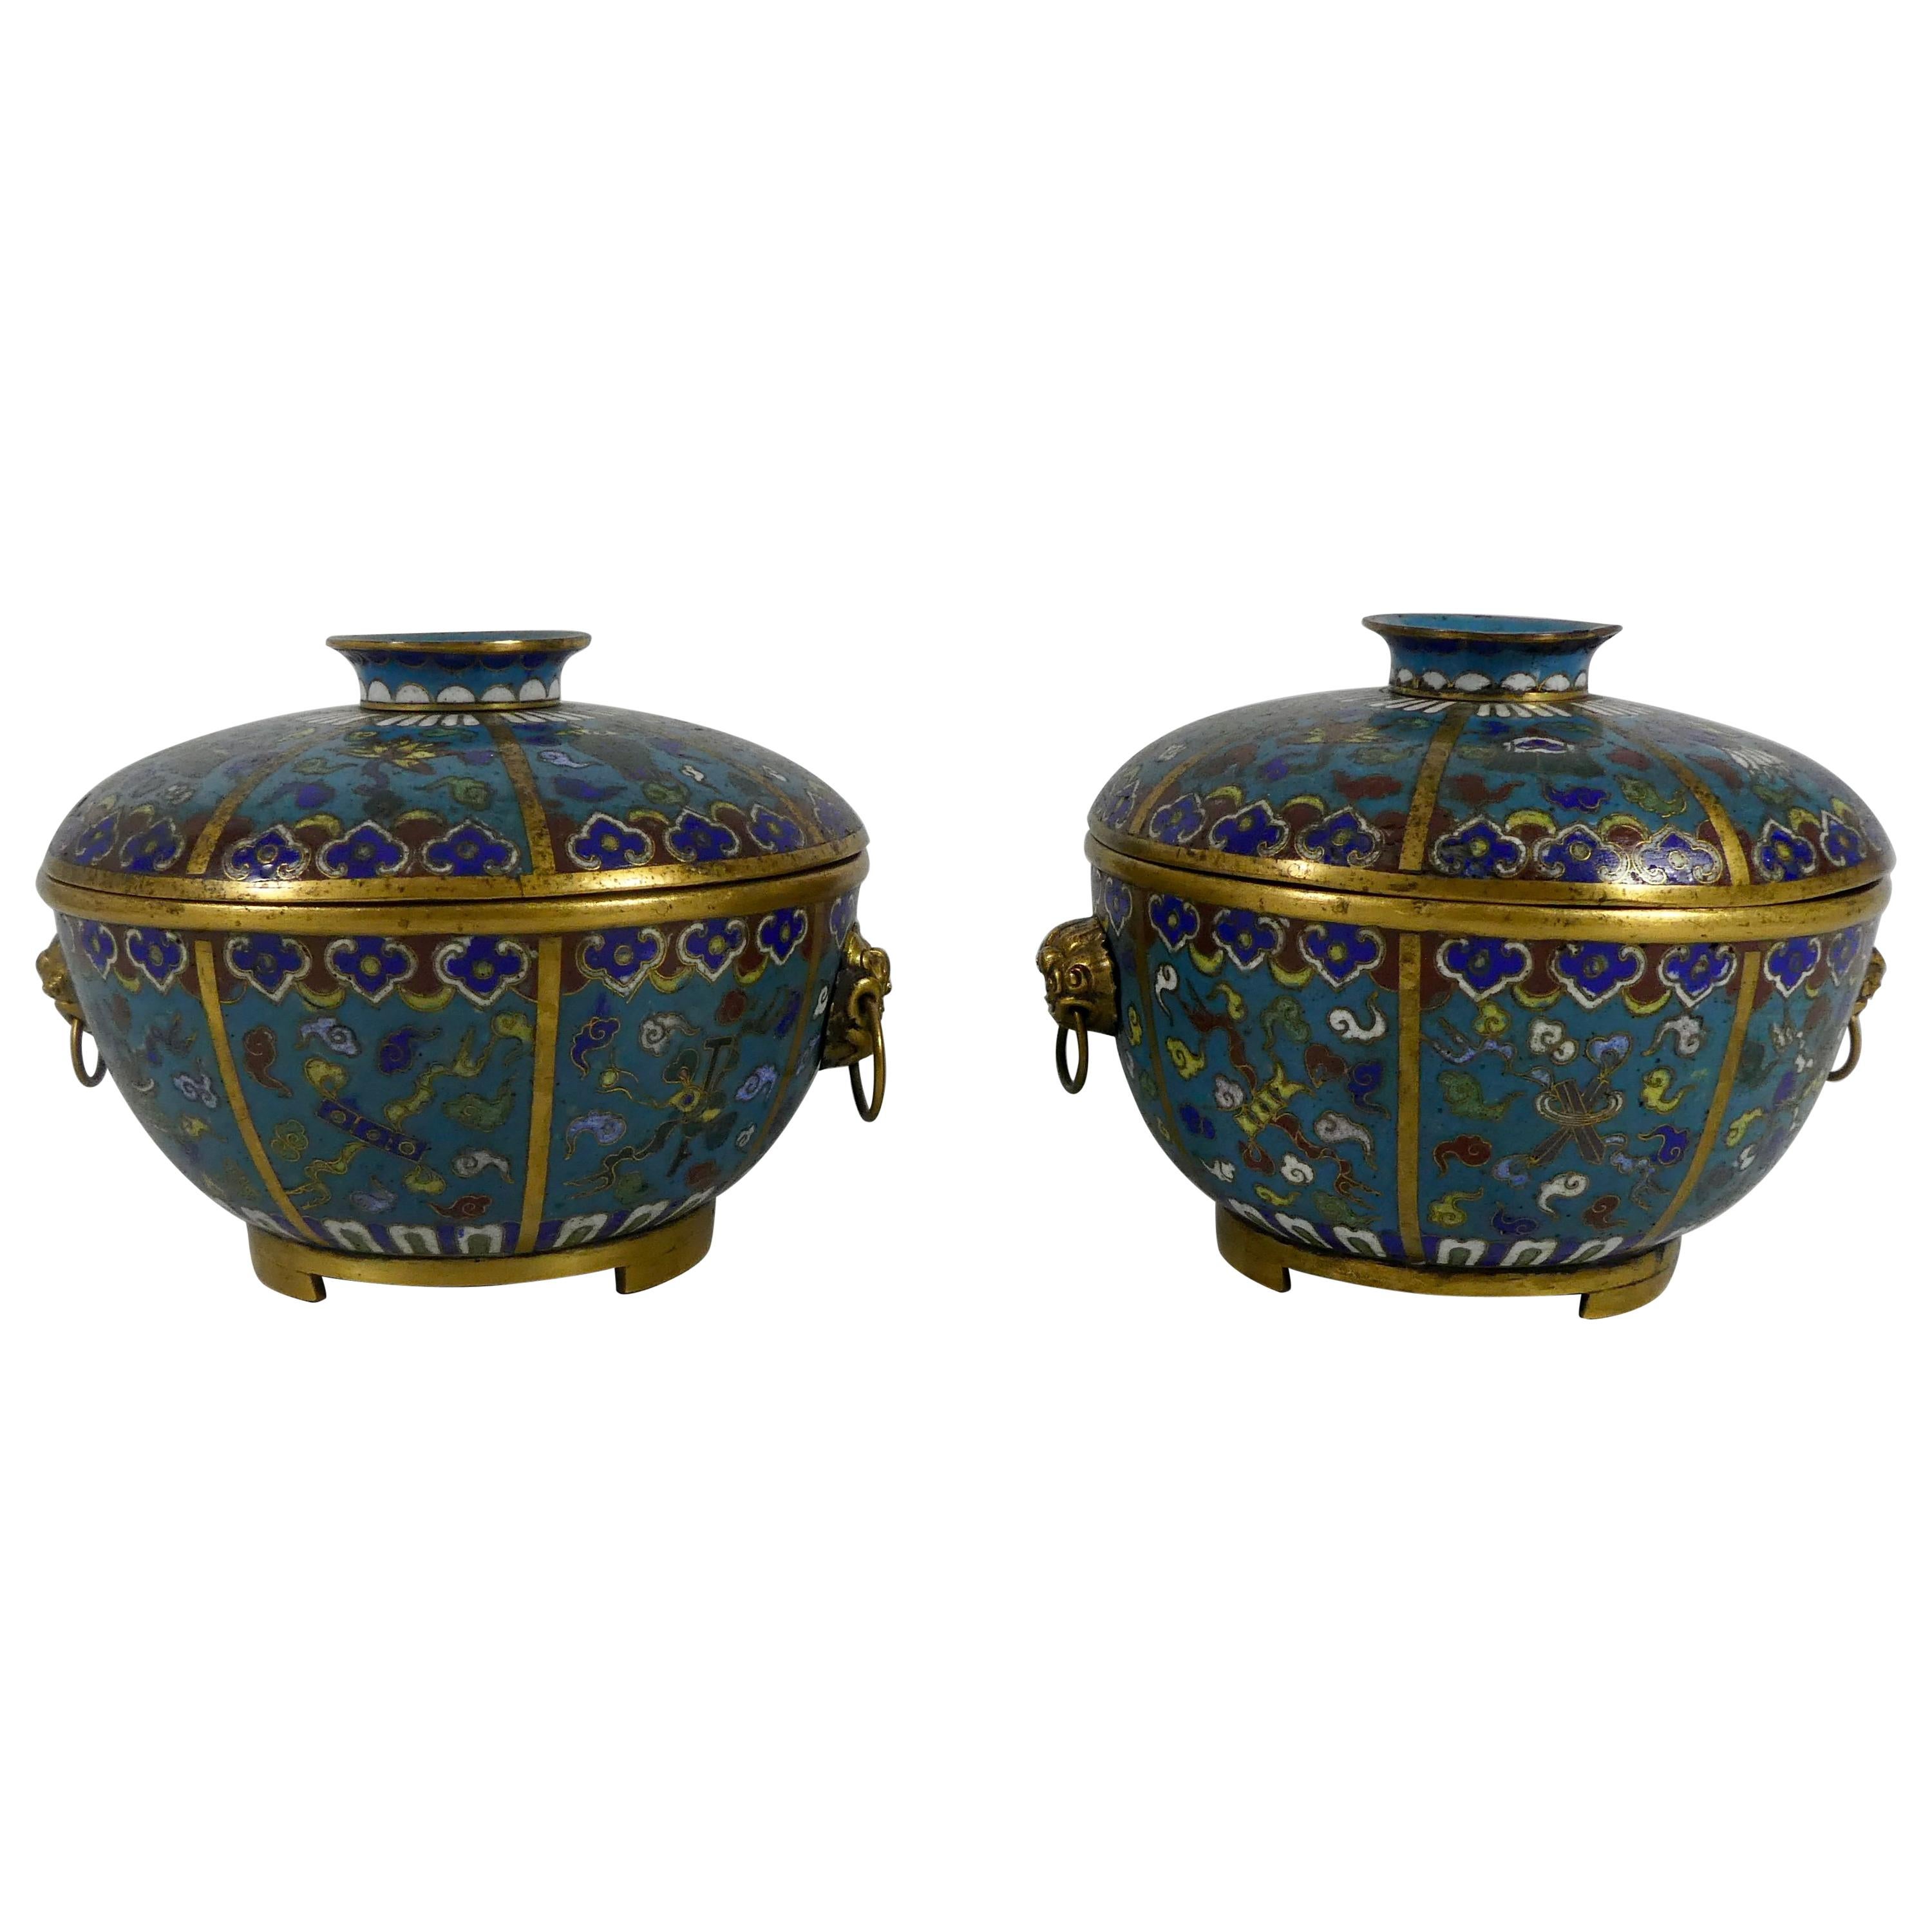 Pair of Chinese Cloisonne Bowls and Covers, early 19th Century, Qing Dynasty